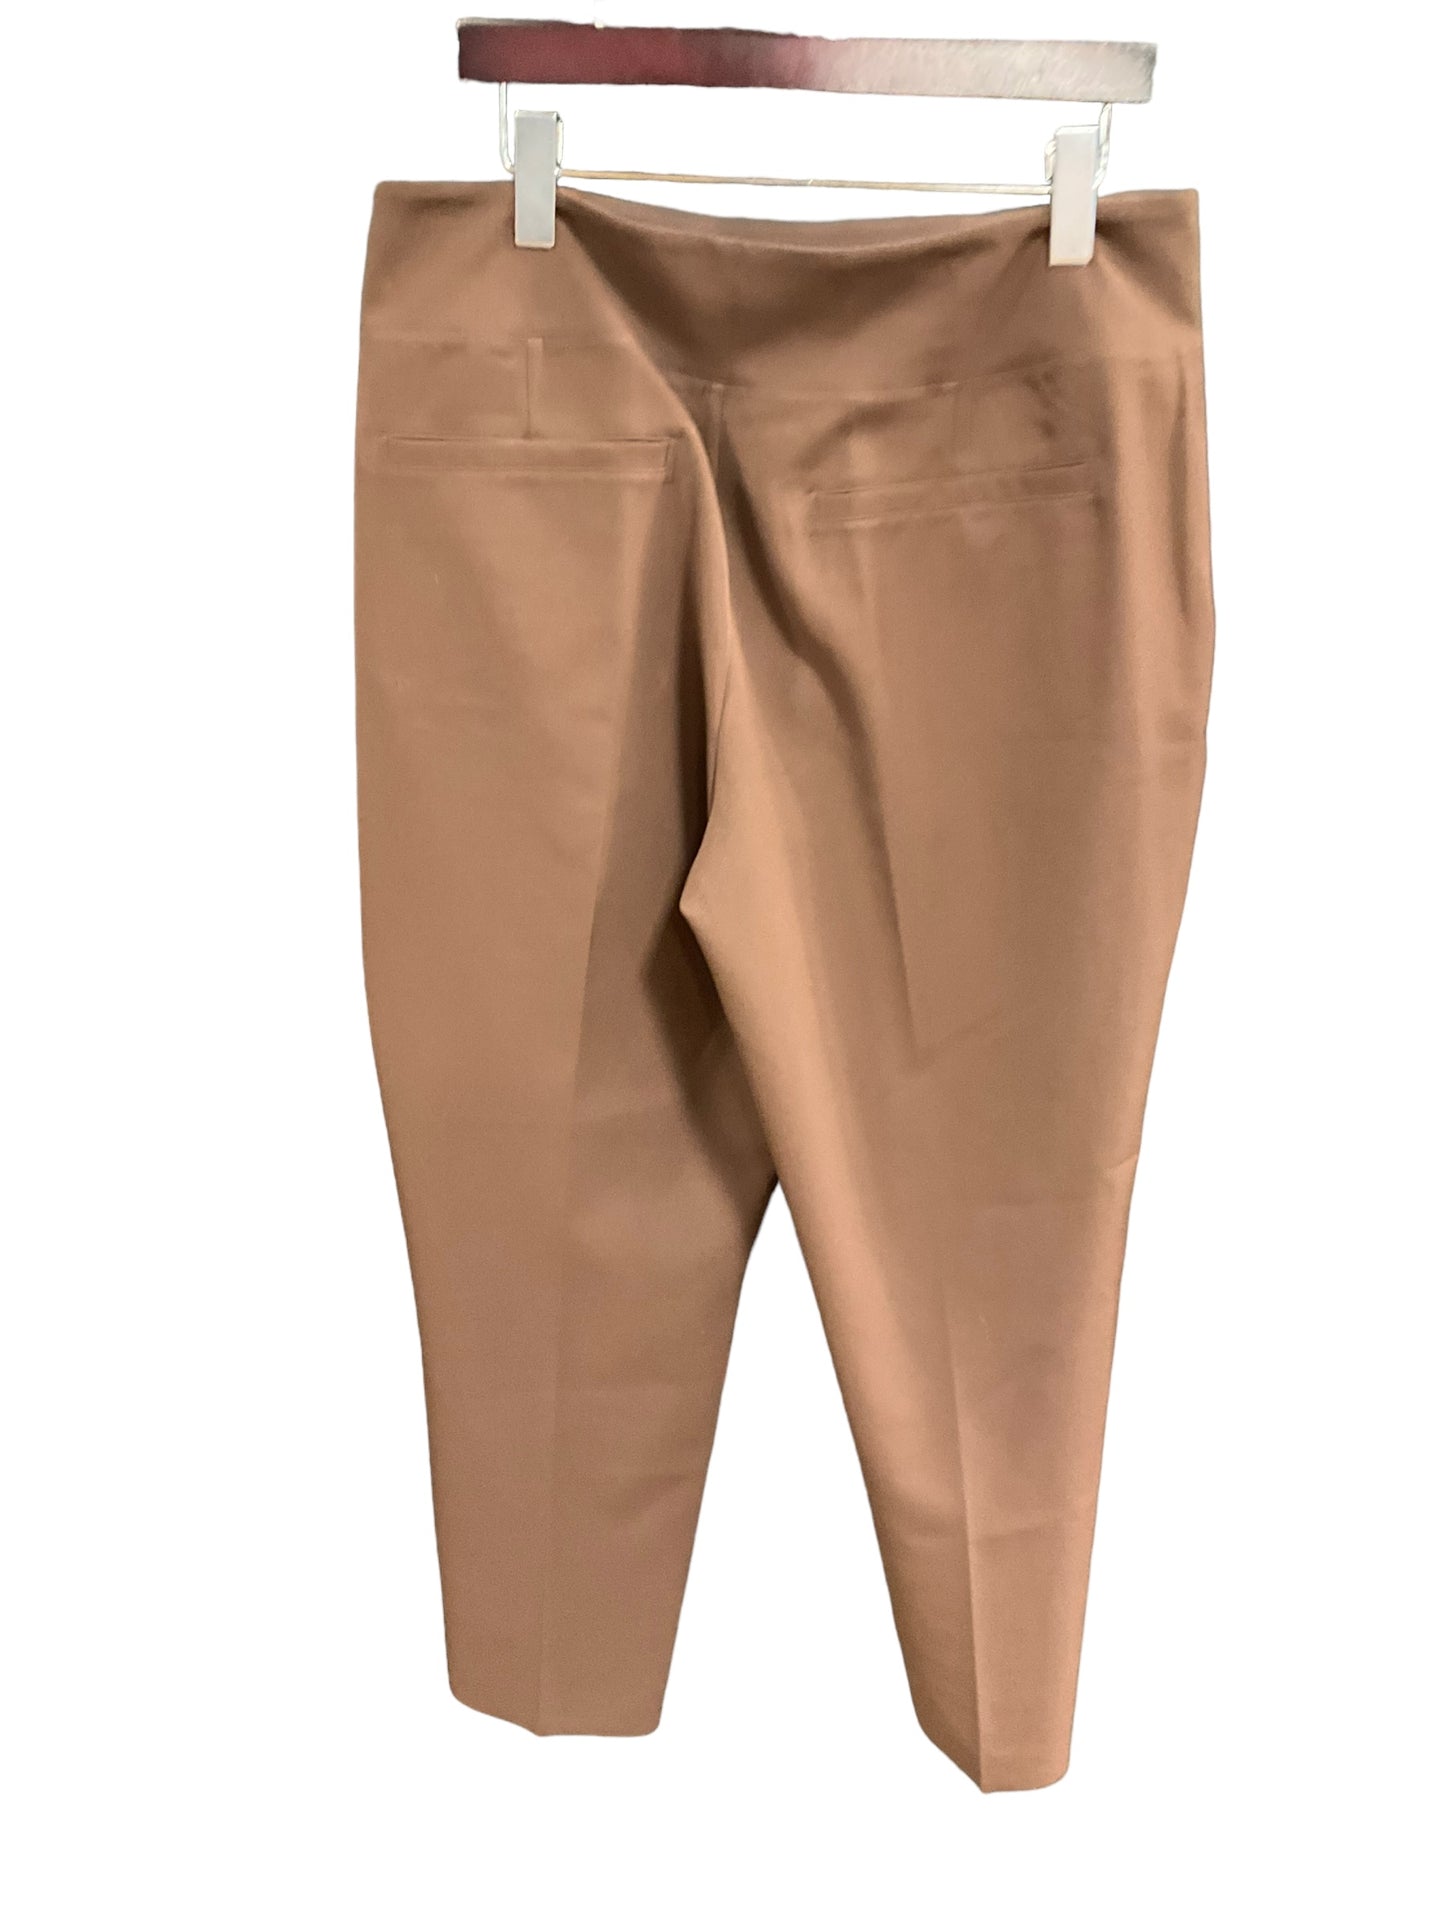 Athletic Pants By Athleta  Size: 14